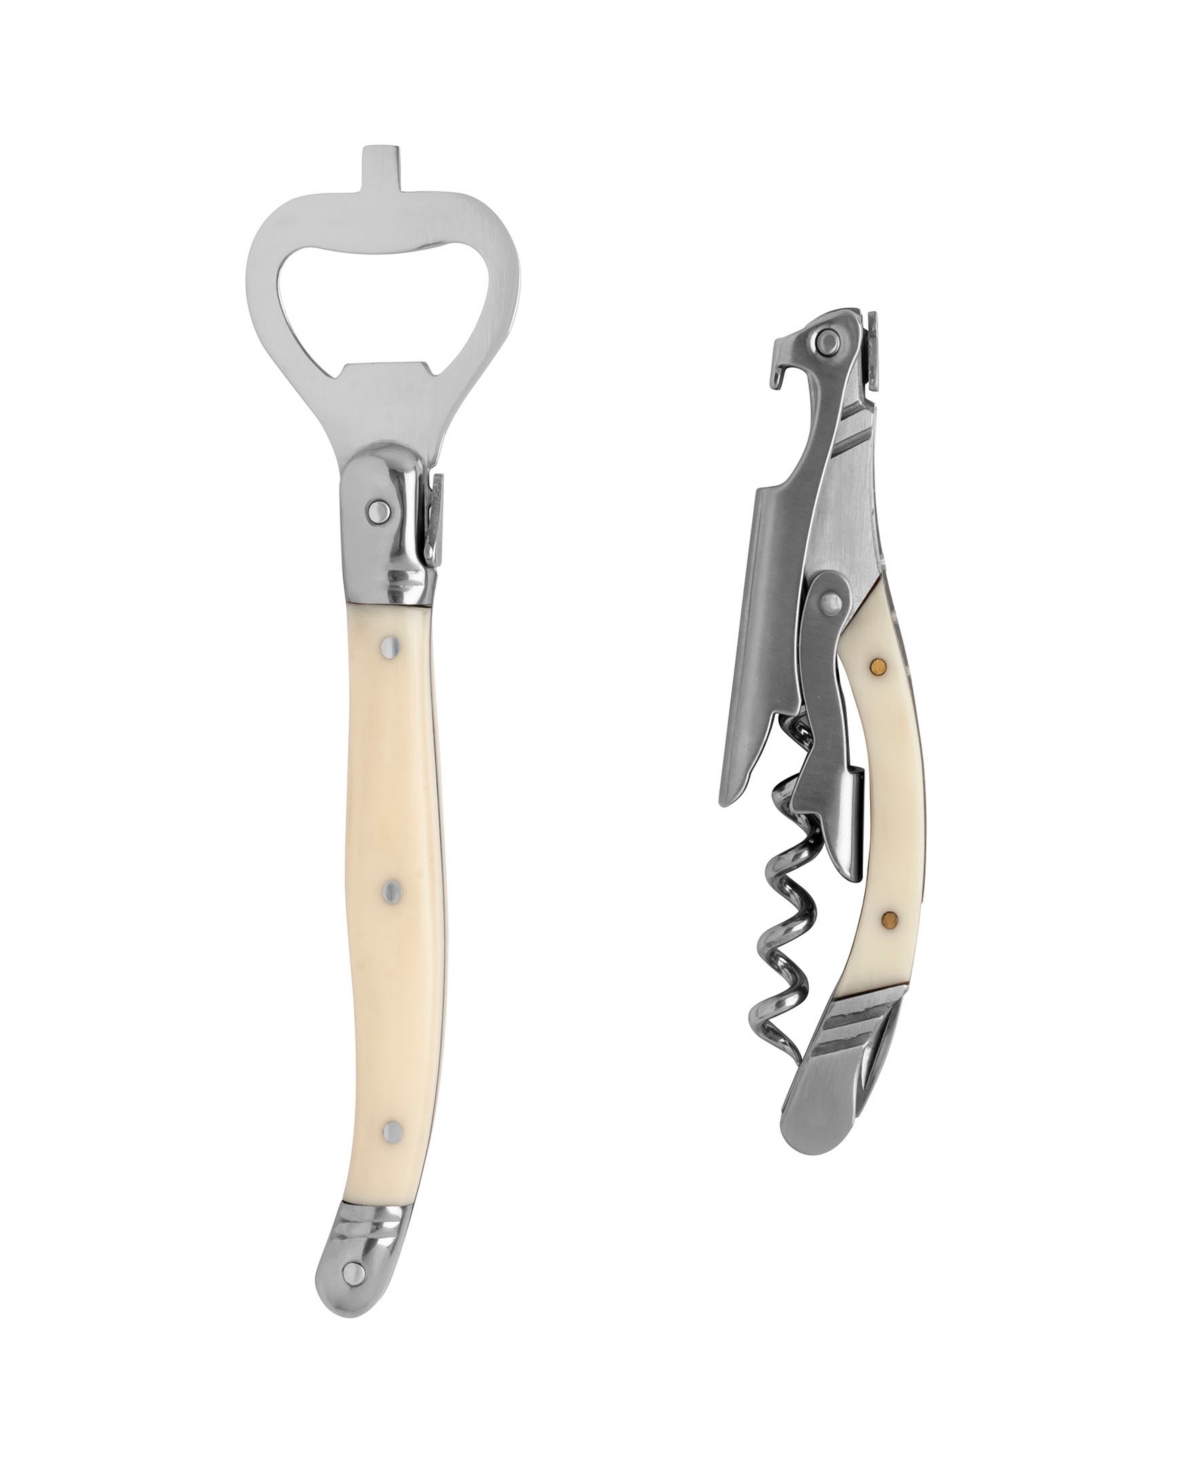 French Home Laguiole Barware Bottle Opener And Corkscrew Set With Handles In Faux Ivory